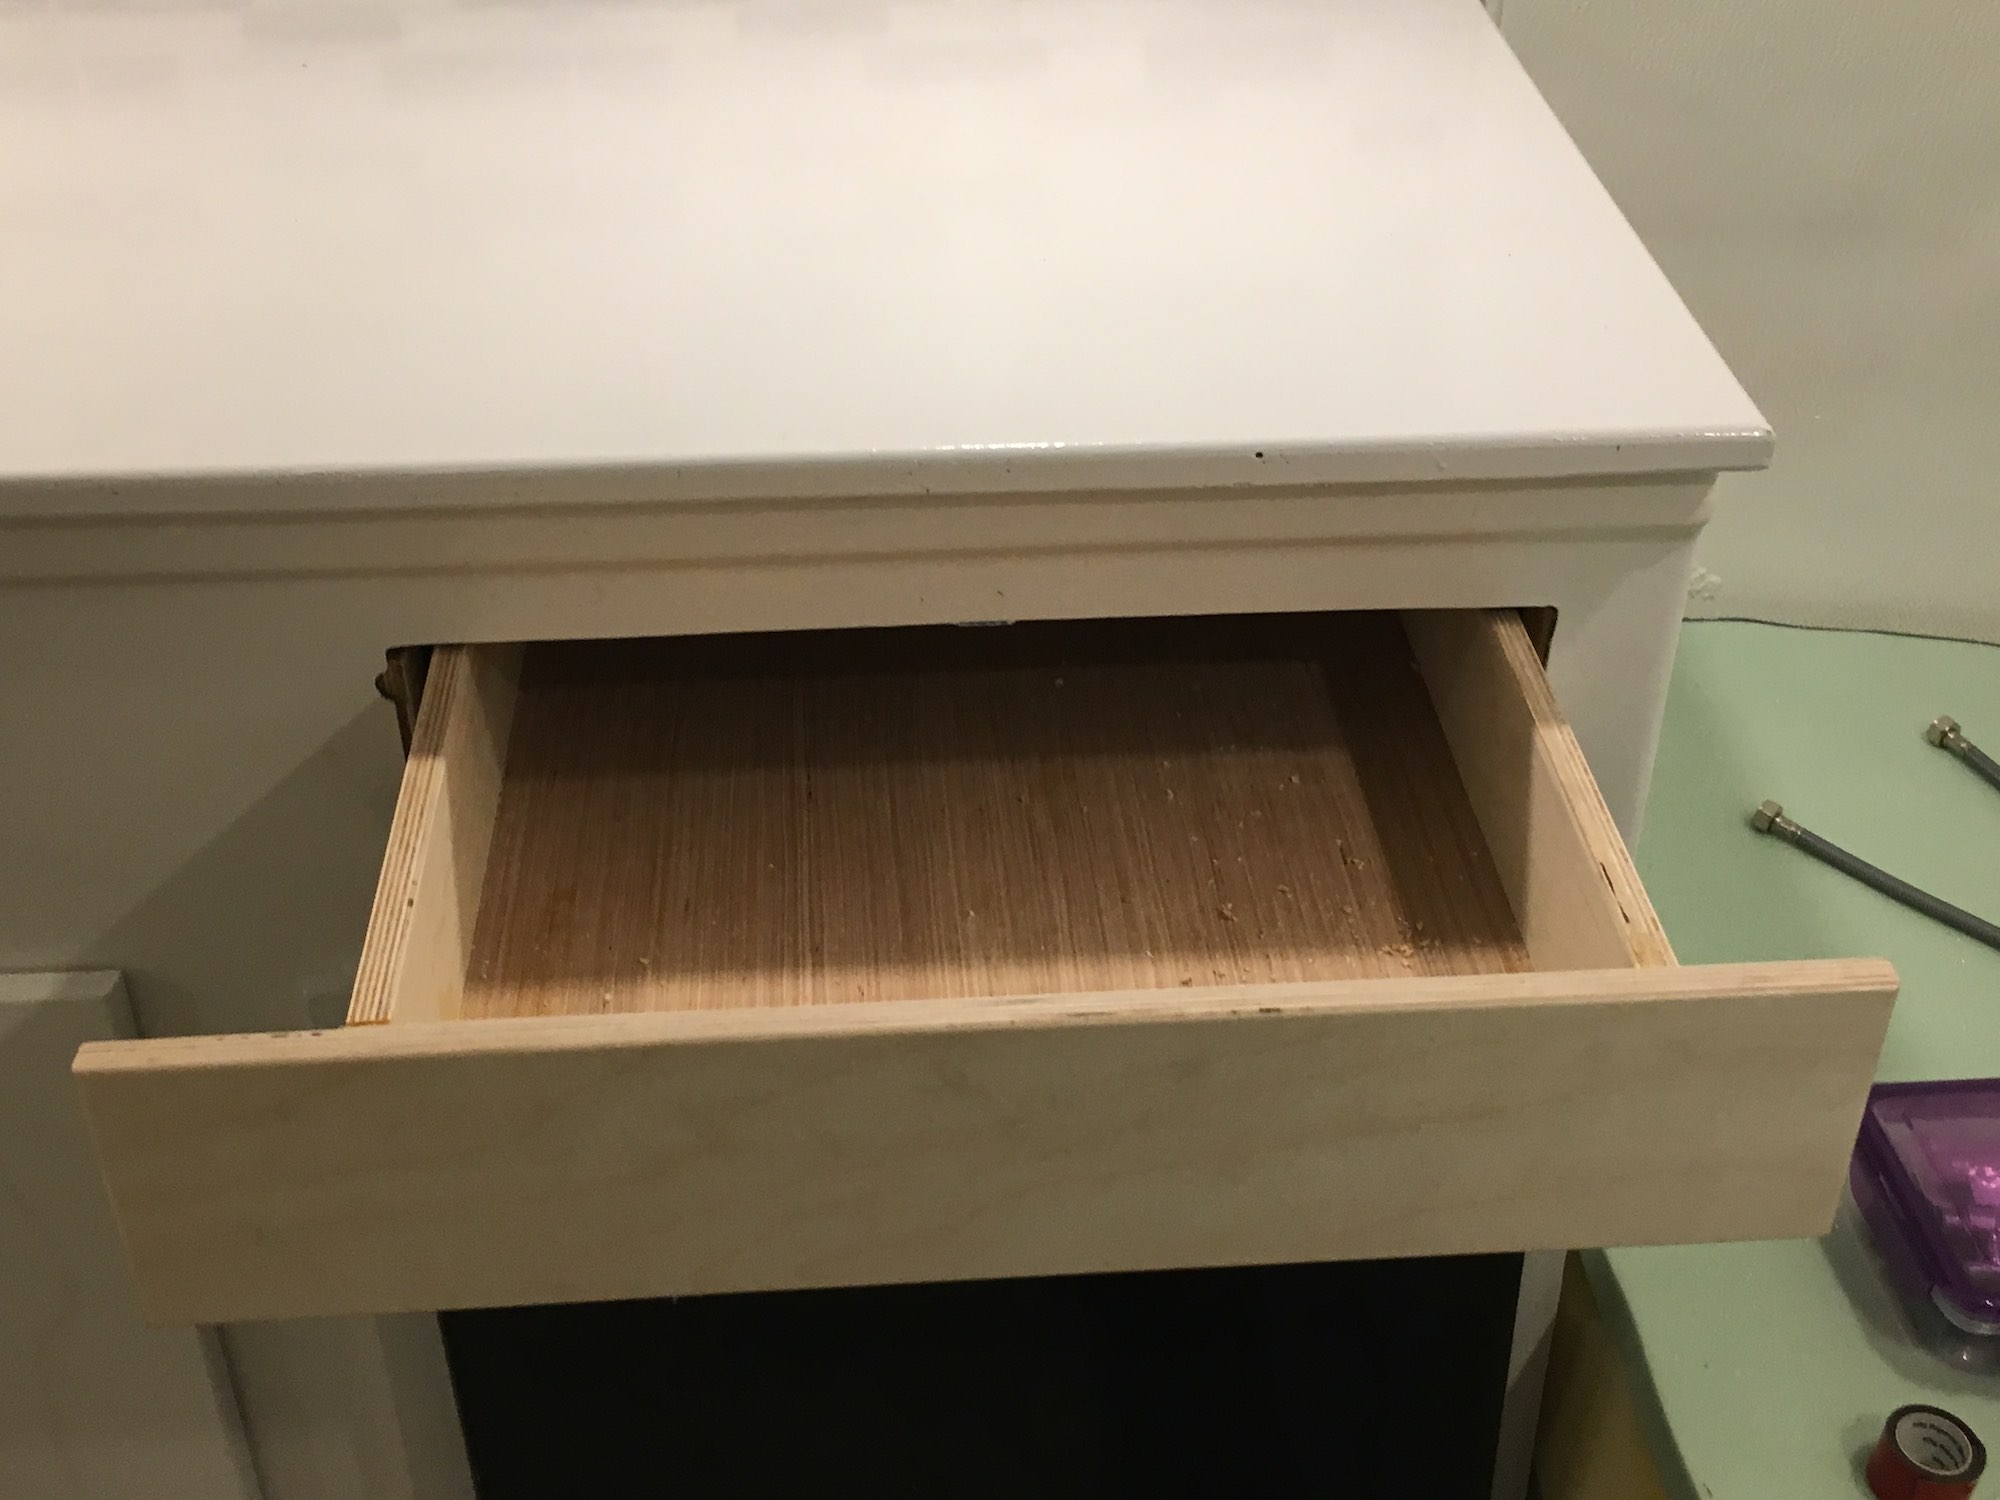 I was really proud of this drawer I built from scratch, including all the mounting points. The original drawer slid out from the bottom of the stove, and both it and the stove were unsalvageable. So I had to get creative.